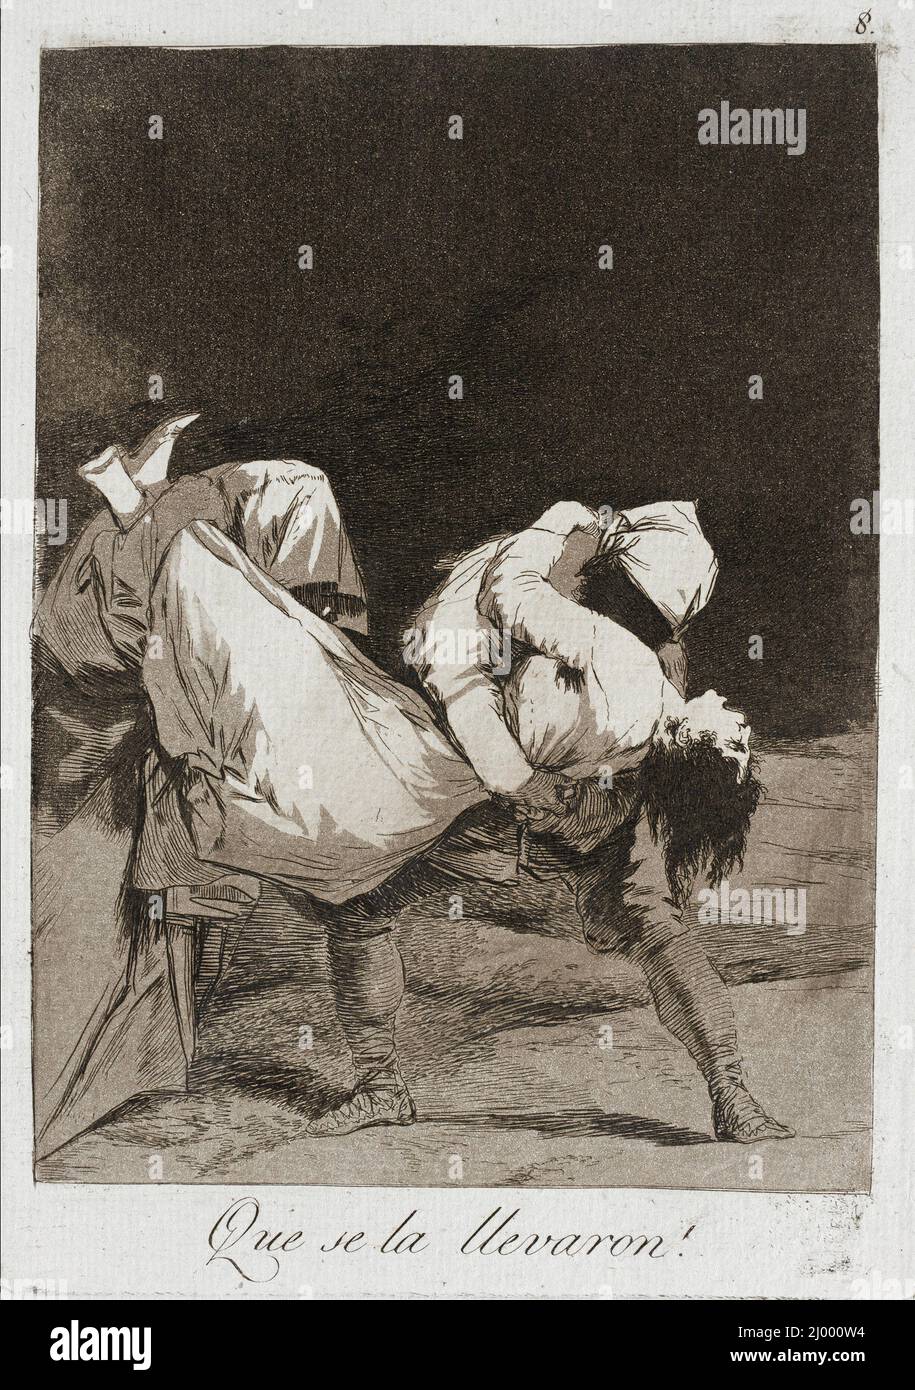 They carried her off!. Francisco Goya y Lucientes (Spain, Fuendetodos, 1746-1828). Spain, 1799. Prints; etchings. Etching and aquatint Stock Photo